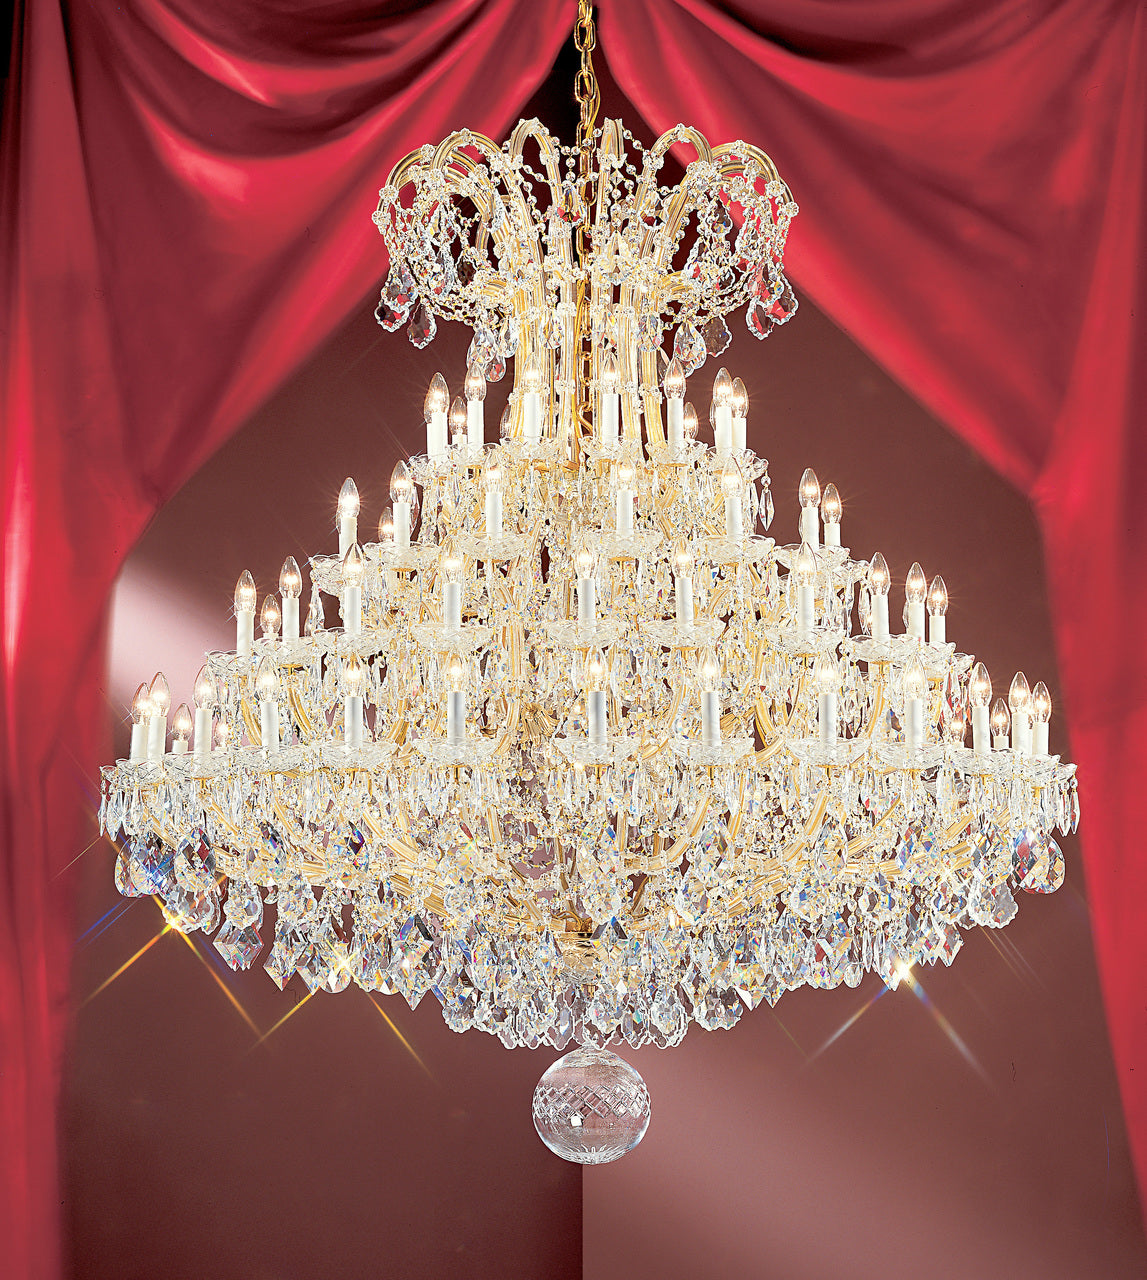 Classic Lighting 8167 OWG C Maria Theresa Traditional Crystal Chandelier in Olde World Gold (Imported from Italy)